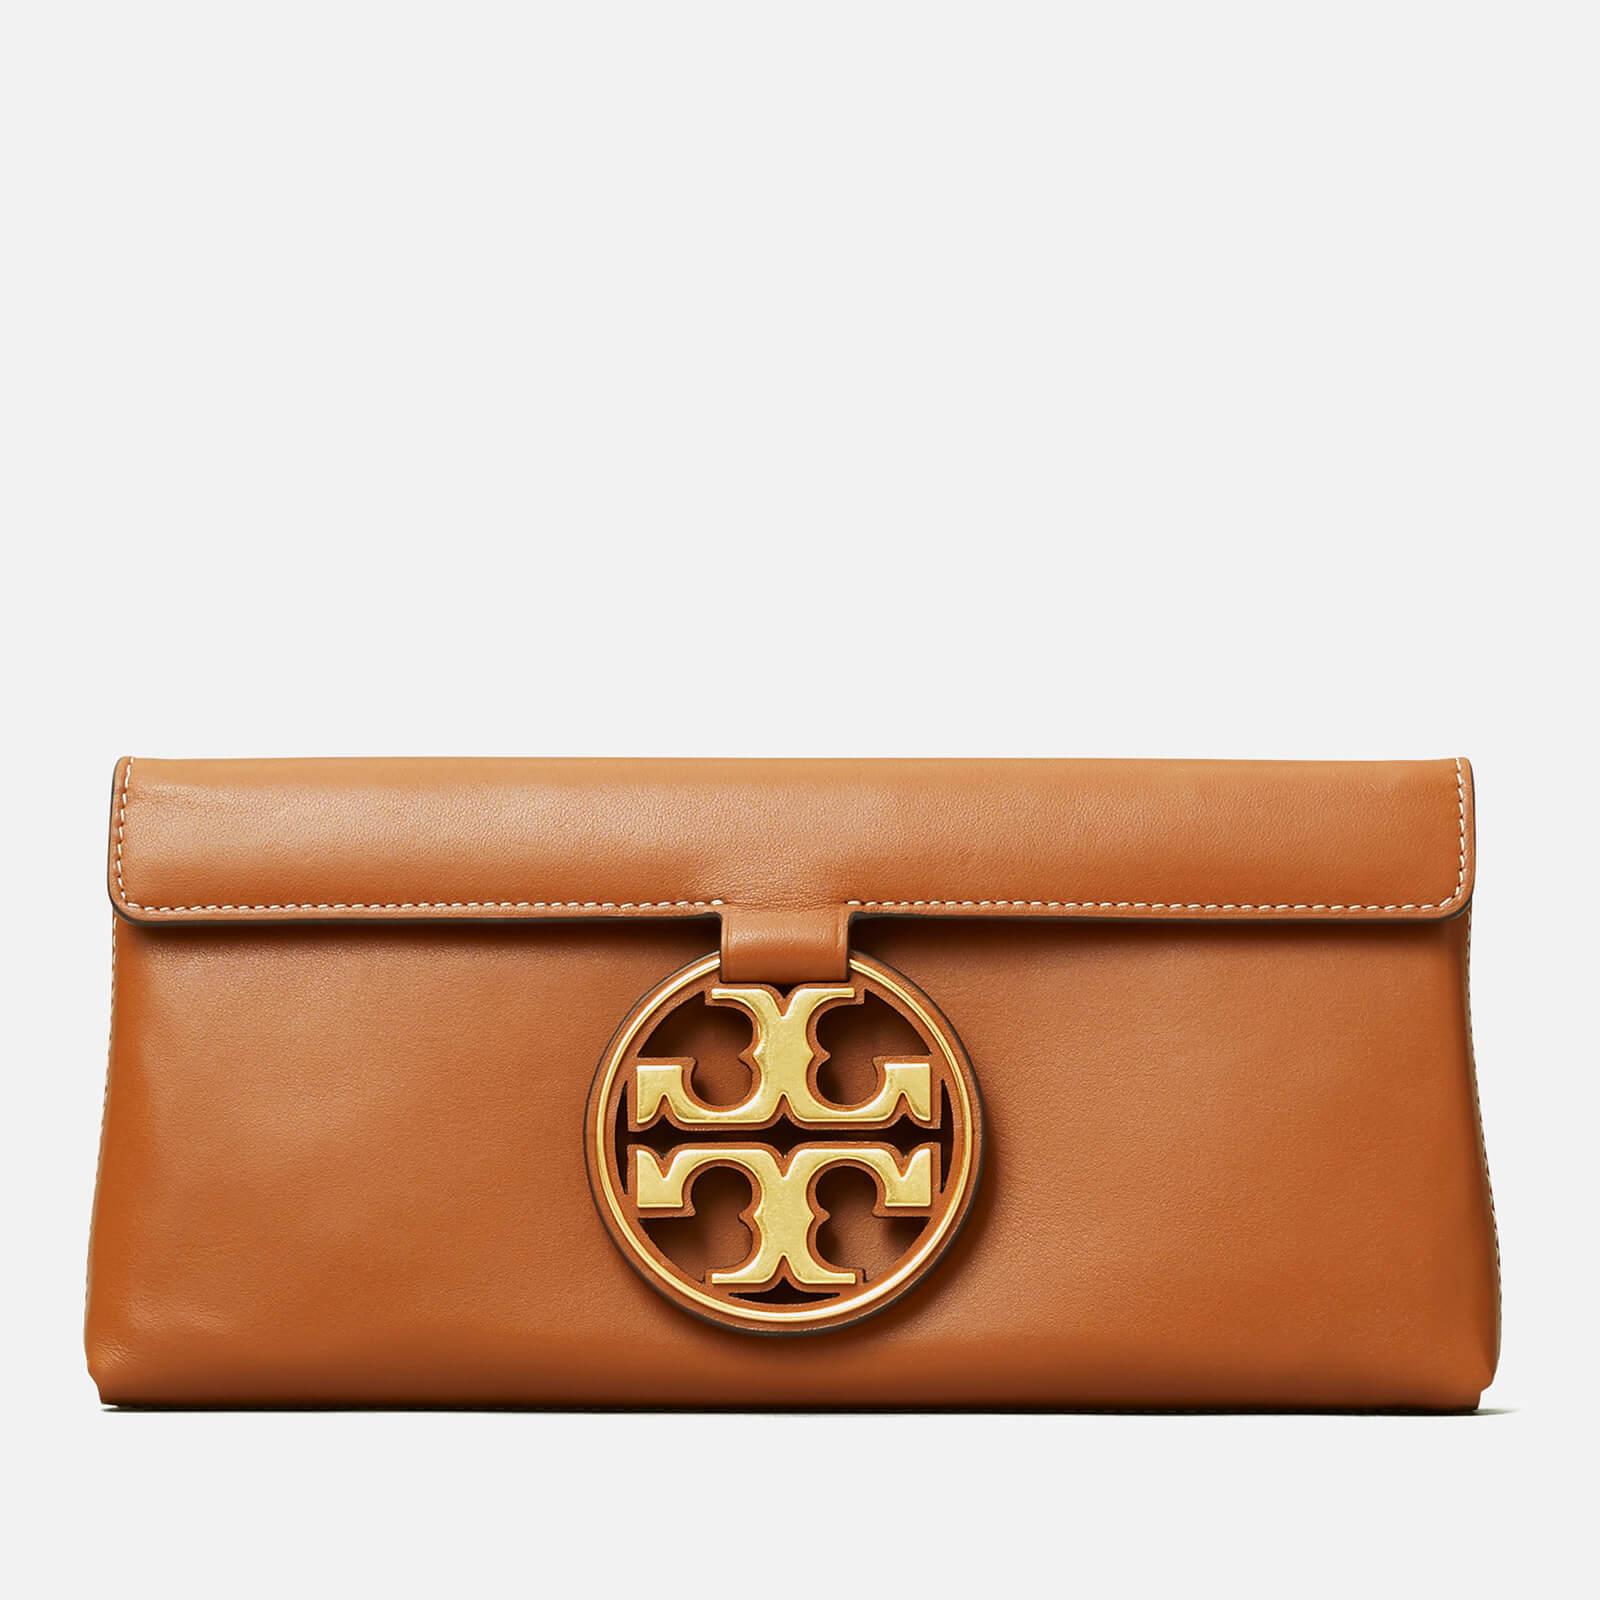 Tory Burch Leather Miller Metal Clutch in Black (Brown) - Save 53% - Lyst